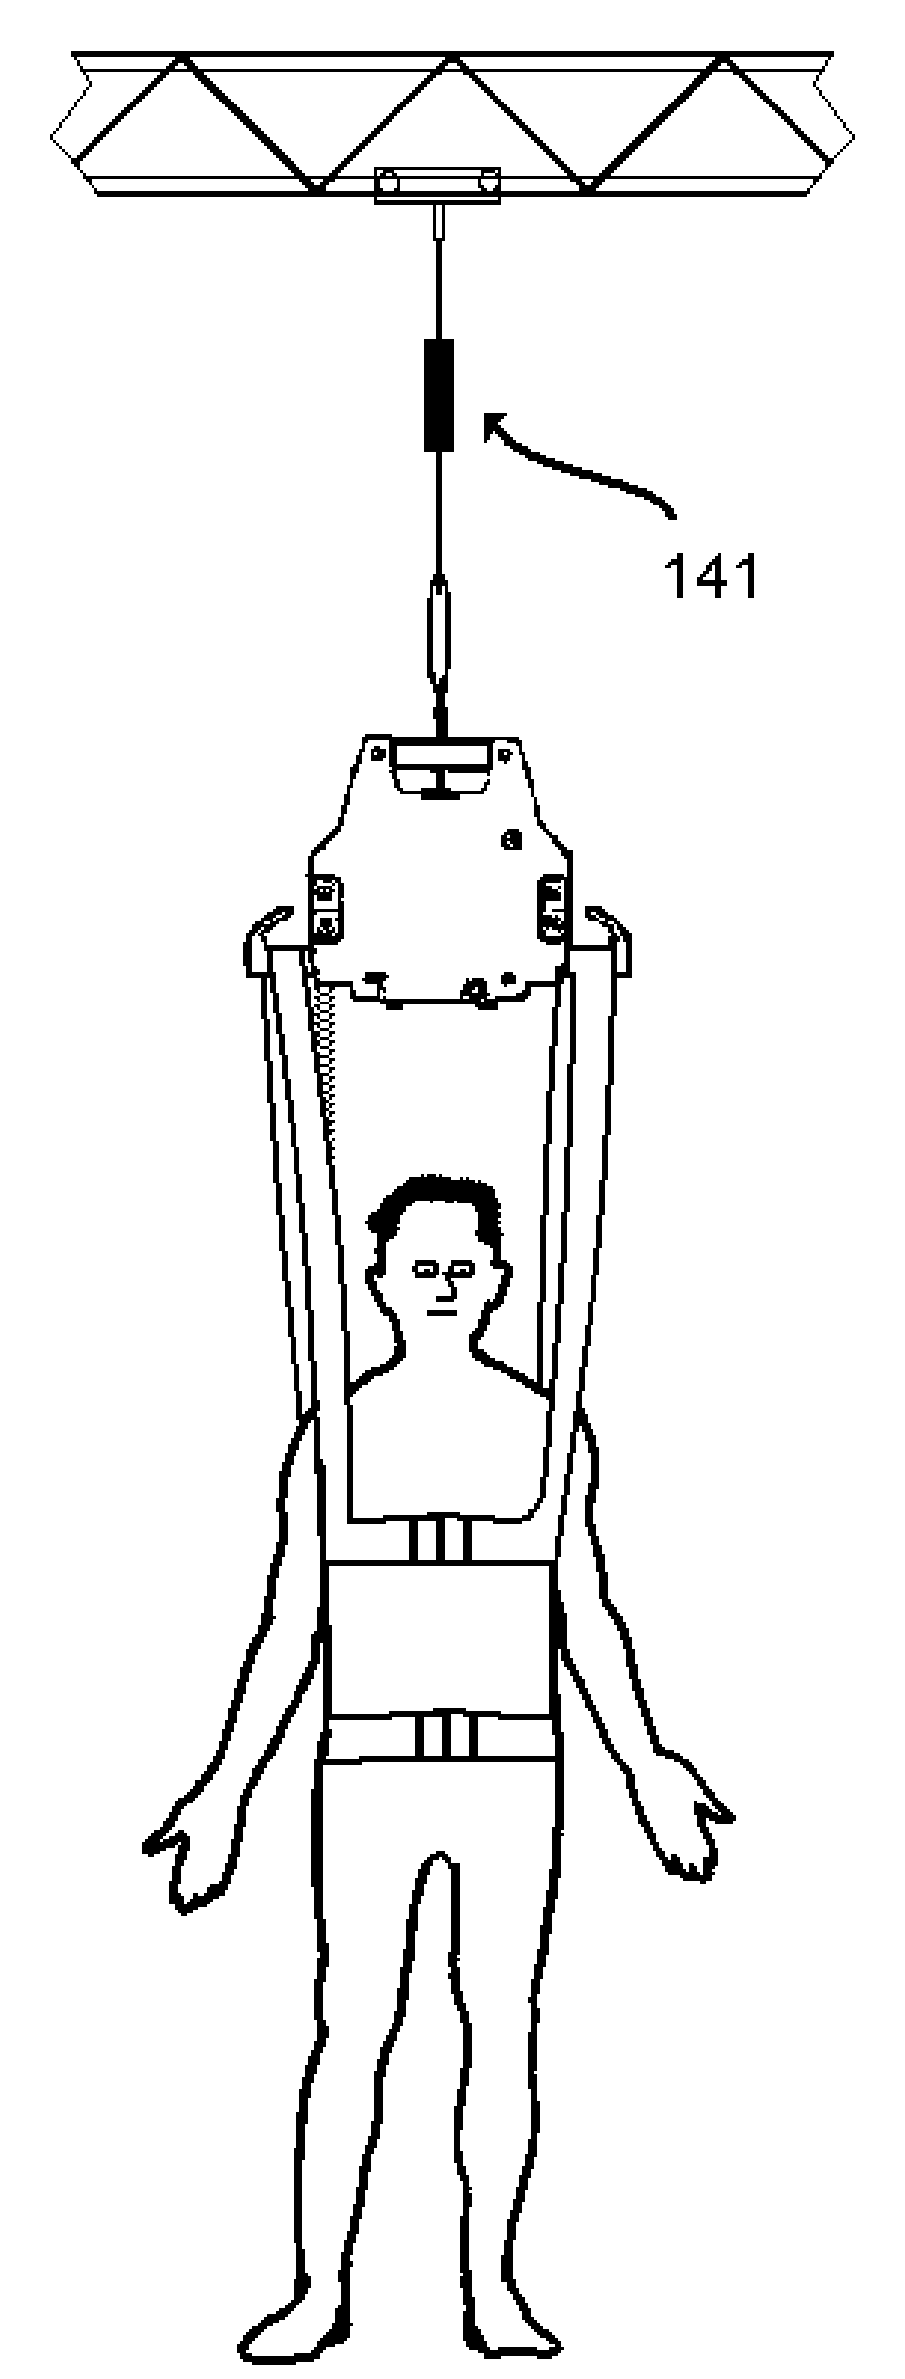 System for people with limited mobility or with elevated risk of falling